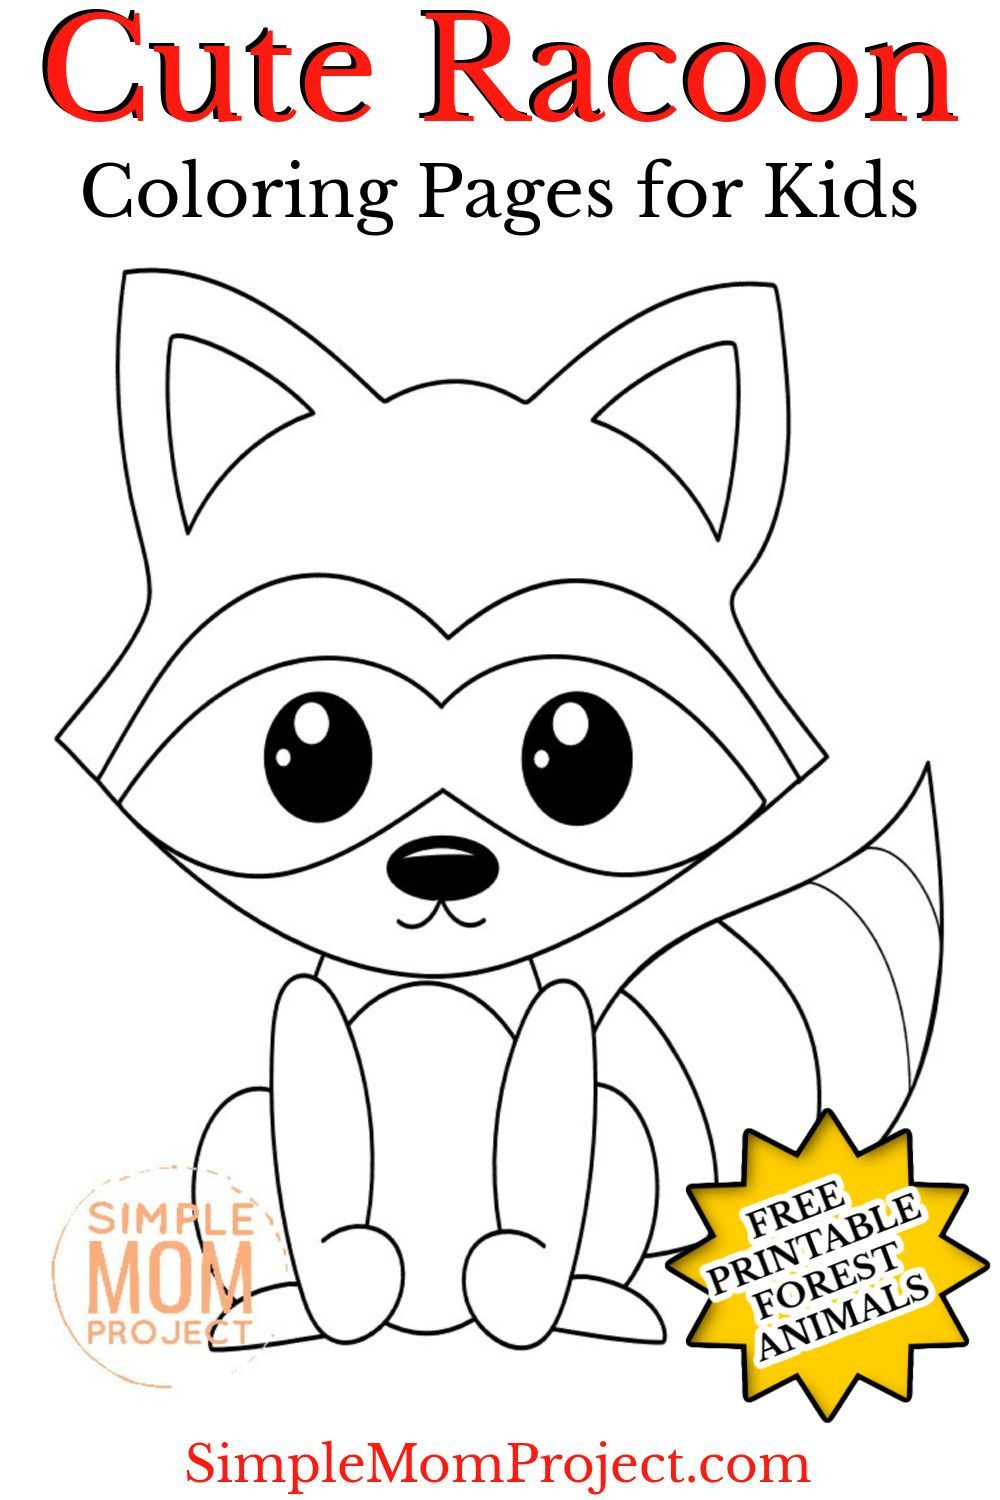 Free printable forest raccoon coloring page animal coloring pages racoon coloring pages